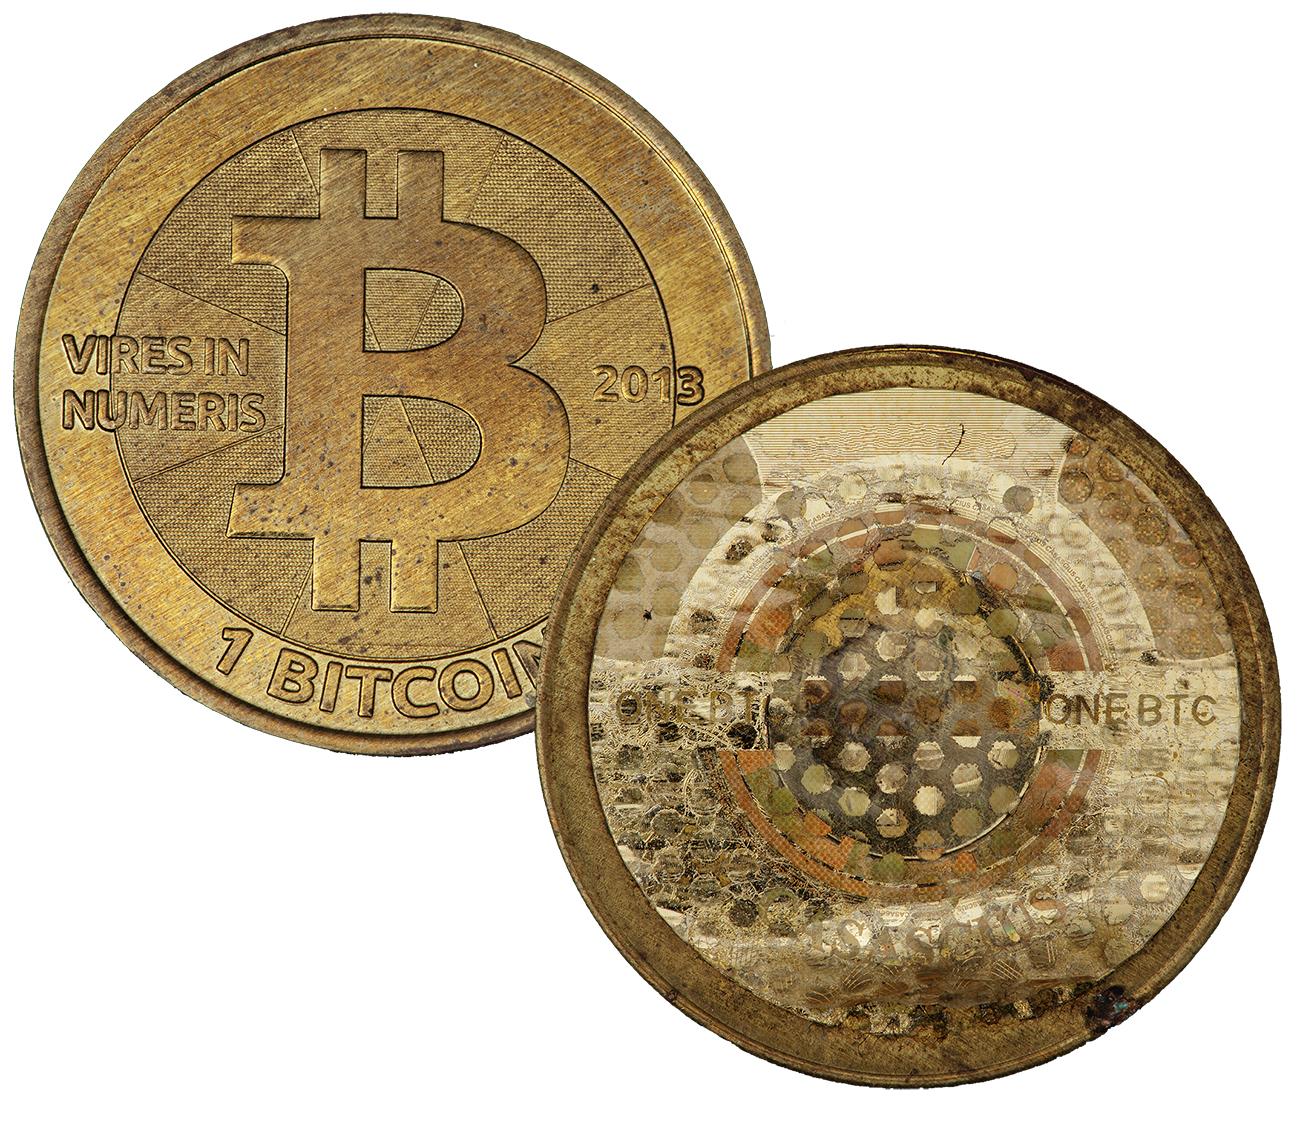 Token, round, gold colour, front: a “B” looking like a dollar sign, back: a honeycomb pattern.